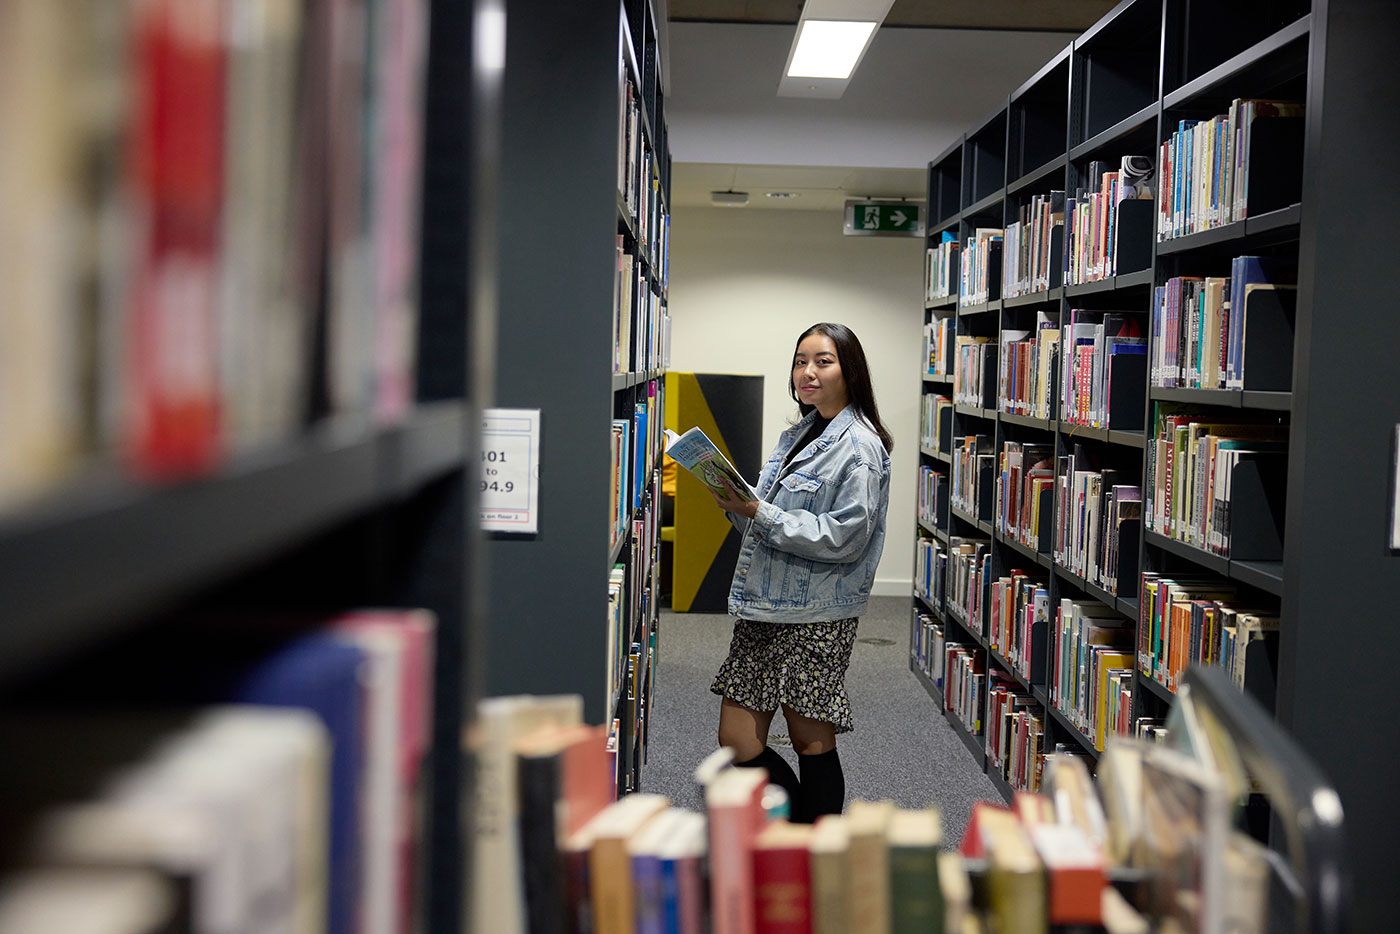 Student stands between two book stacks holding an open book